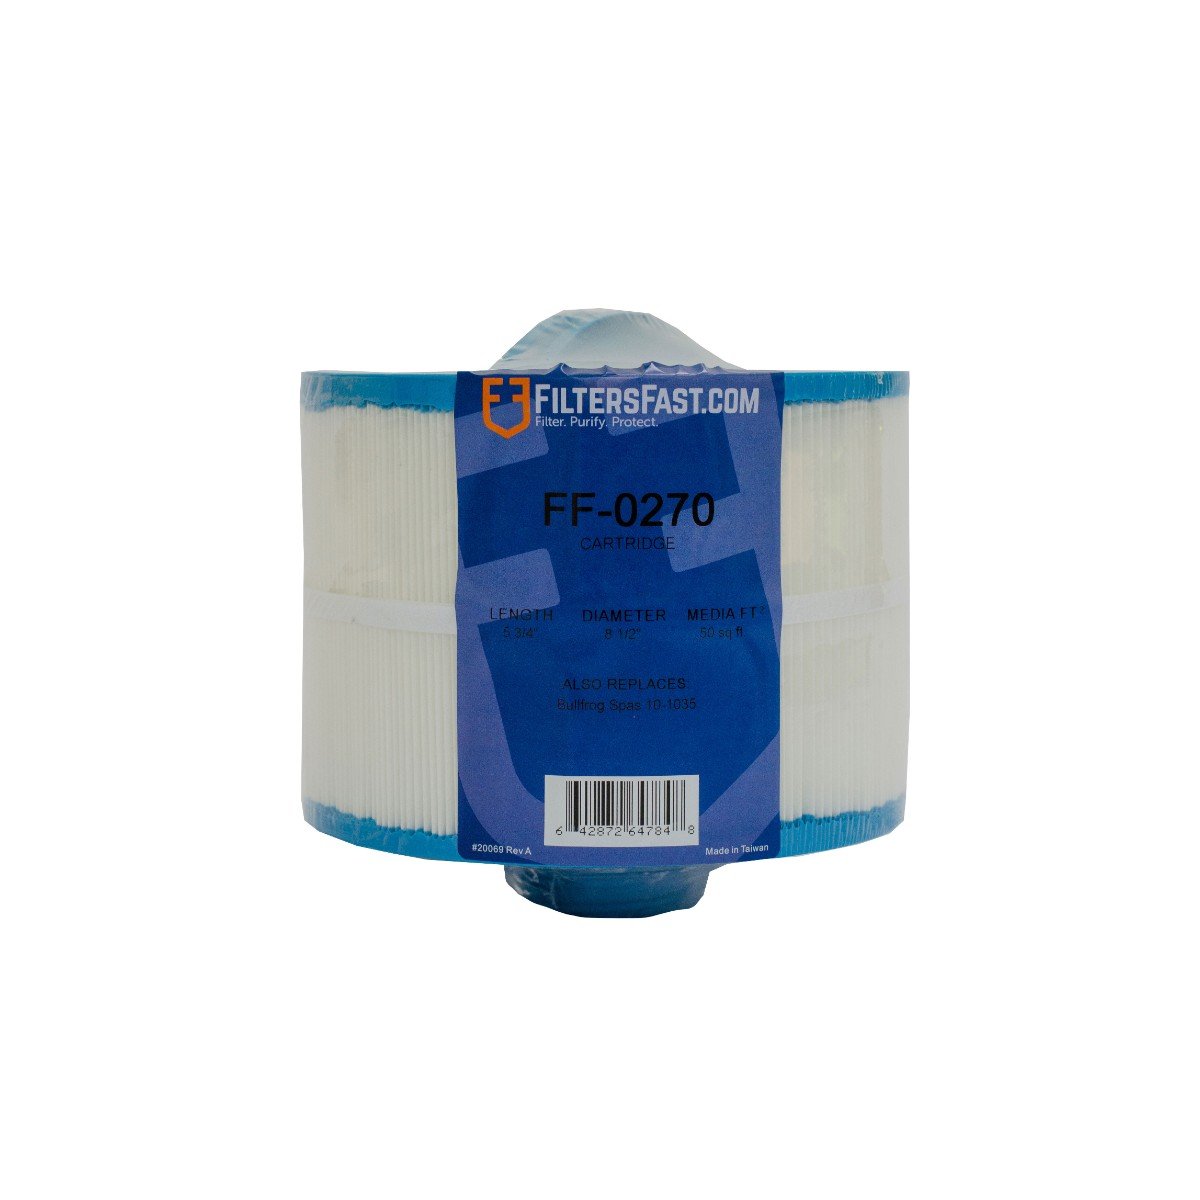 Filters Fast&reg; FF-0270 Replacement For Bullfrog 10-1035